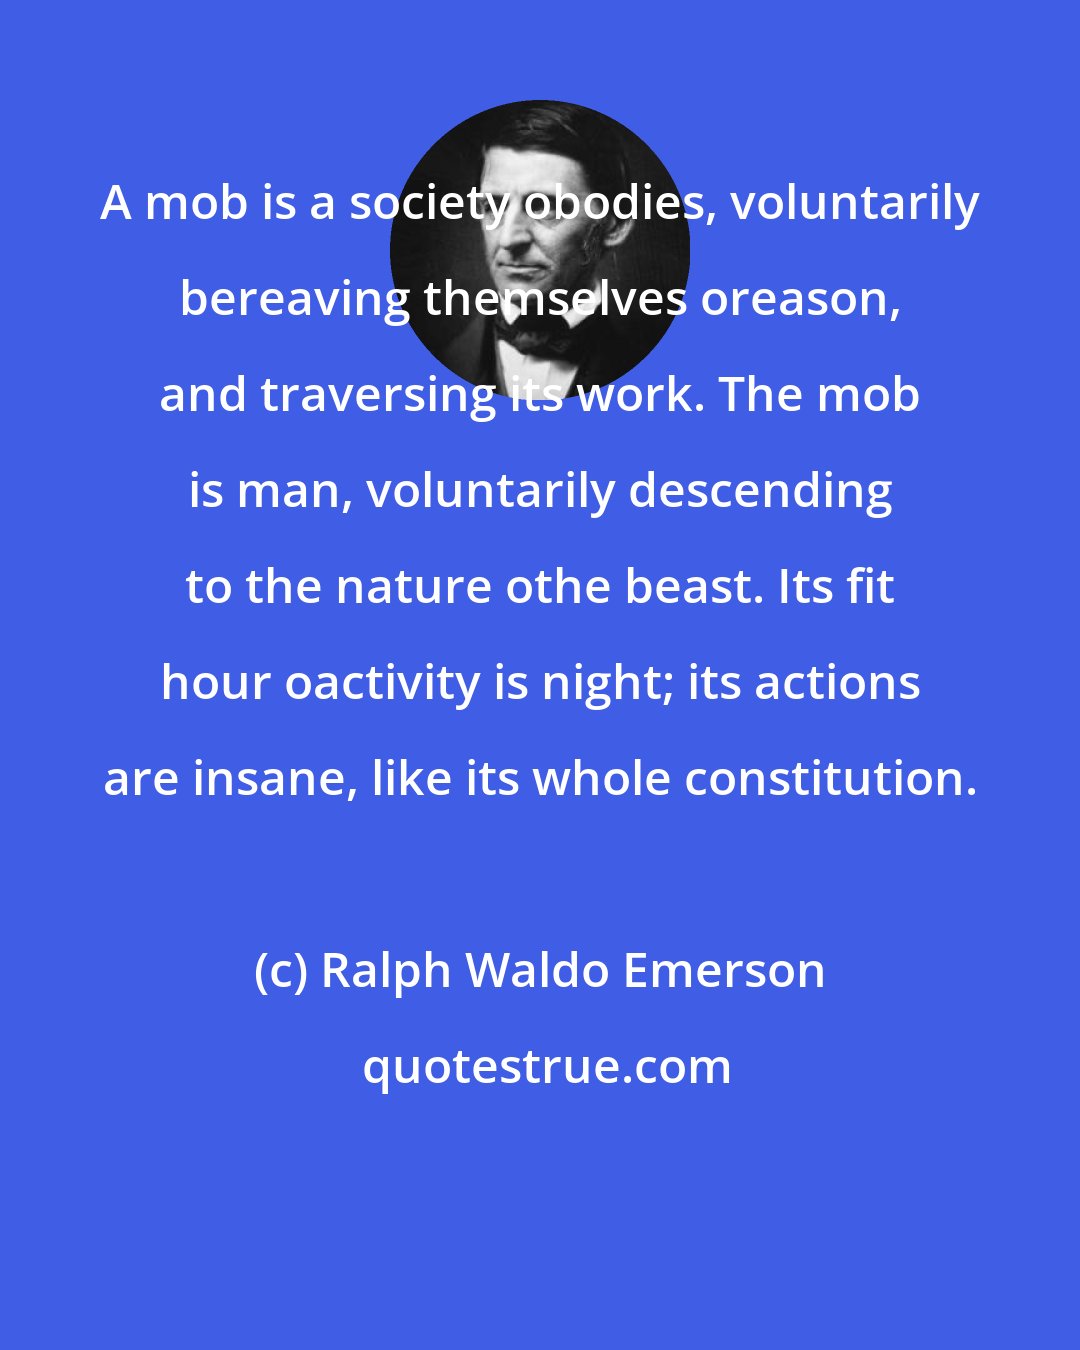 Ralph Waldo Emerson: A mob is a society obodies, voluntarily bereaving themselves oreason, and traversing its work. The mob is man, voluntarily descending to the nature othe beast. Its fit hour oactivity is night; its actions are insane, like its whole constitution.